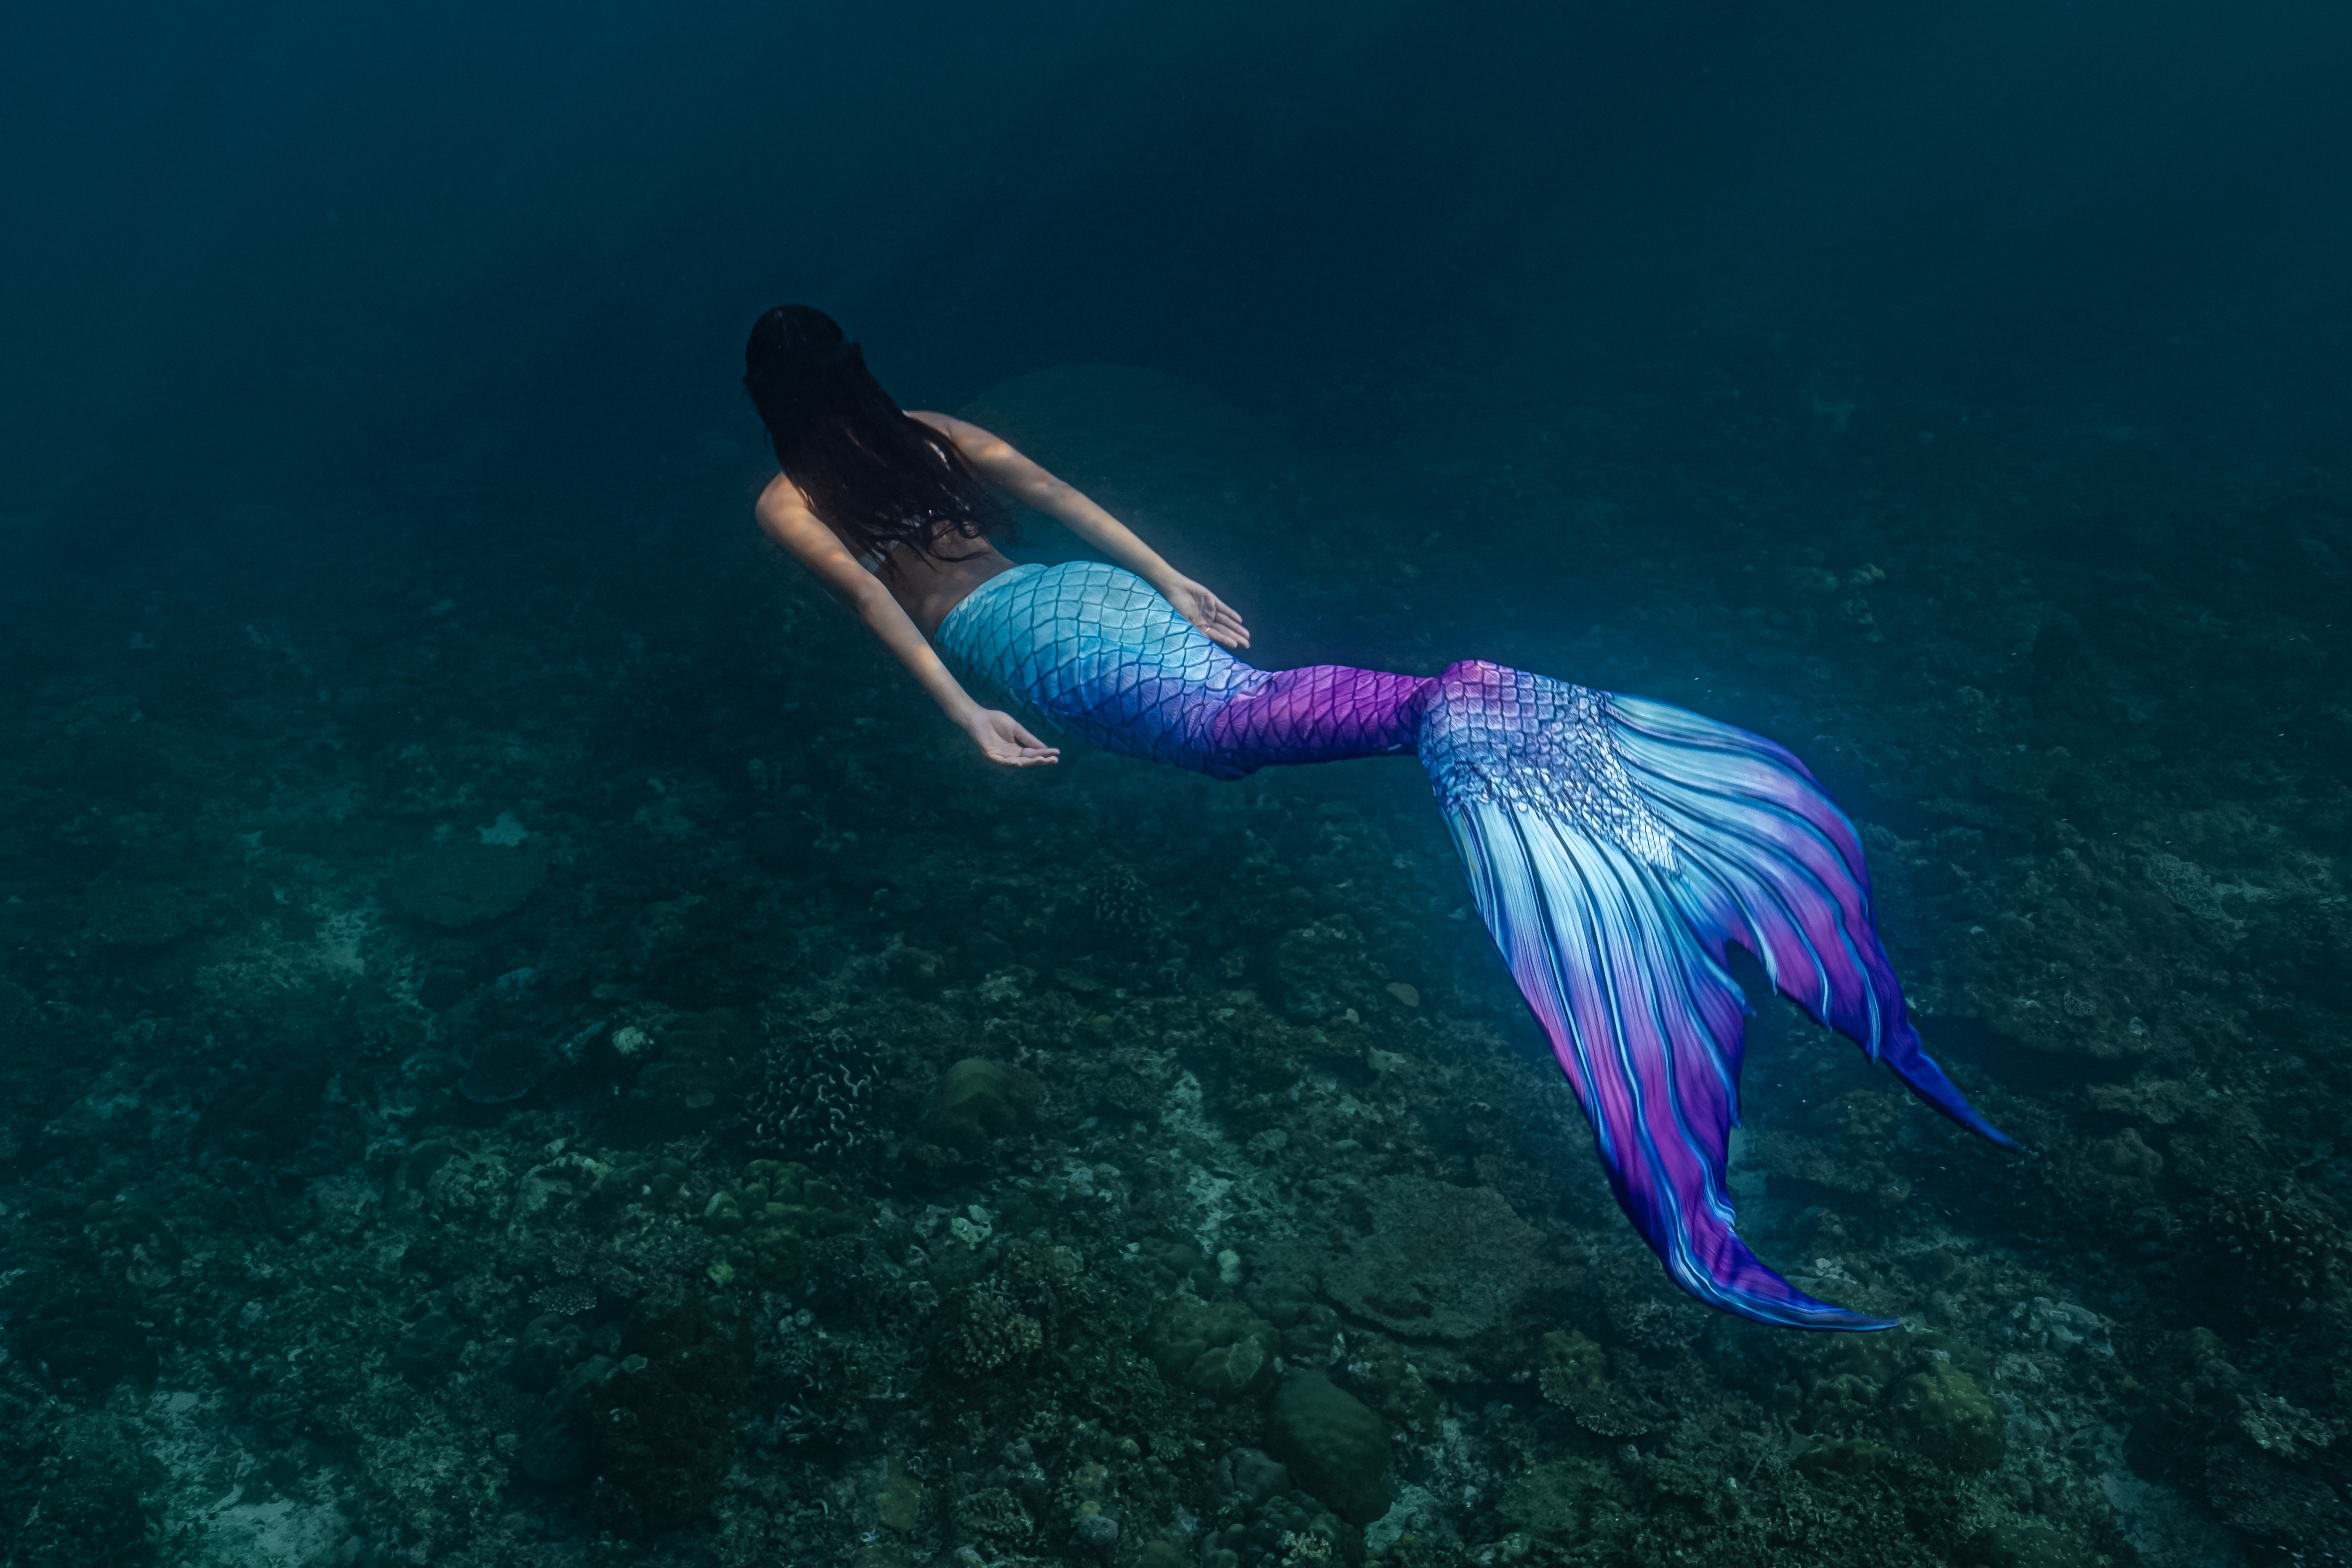 An image of a blue and purple mermaid in the sea